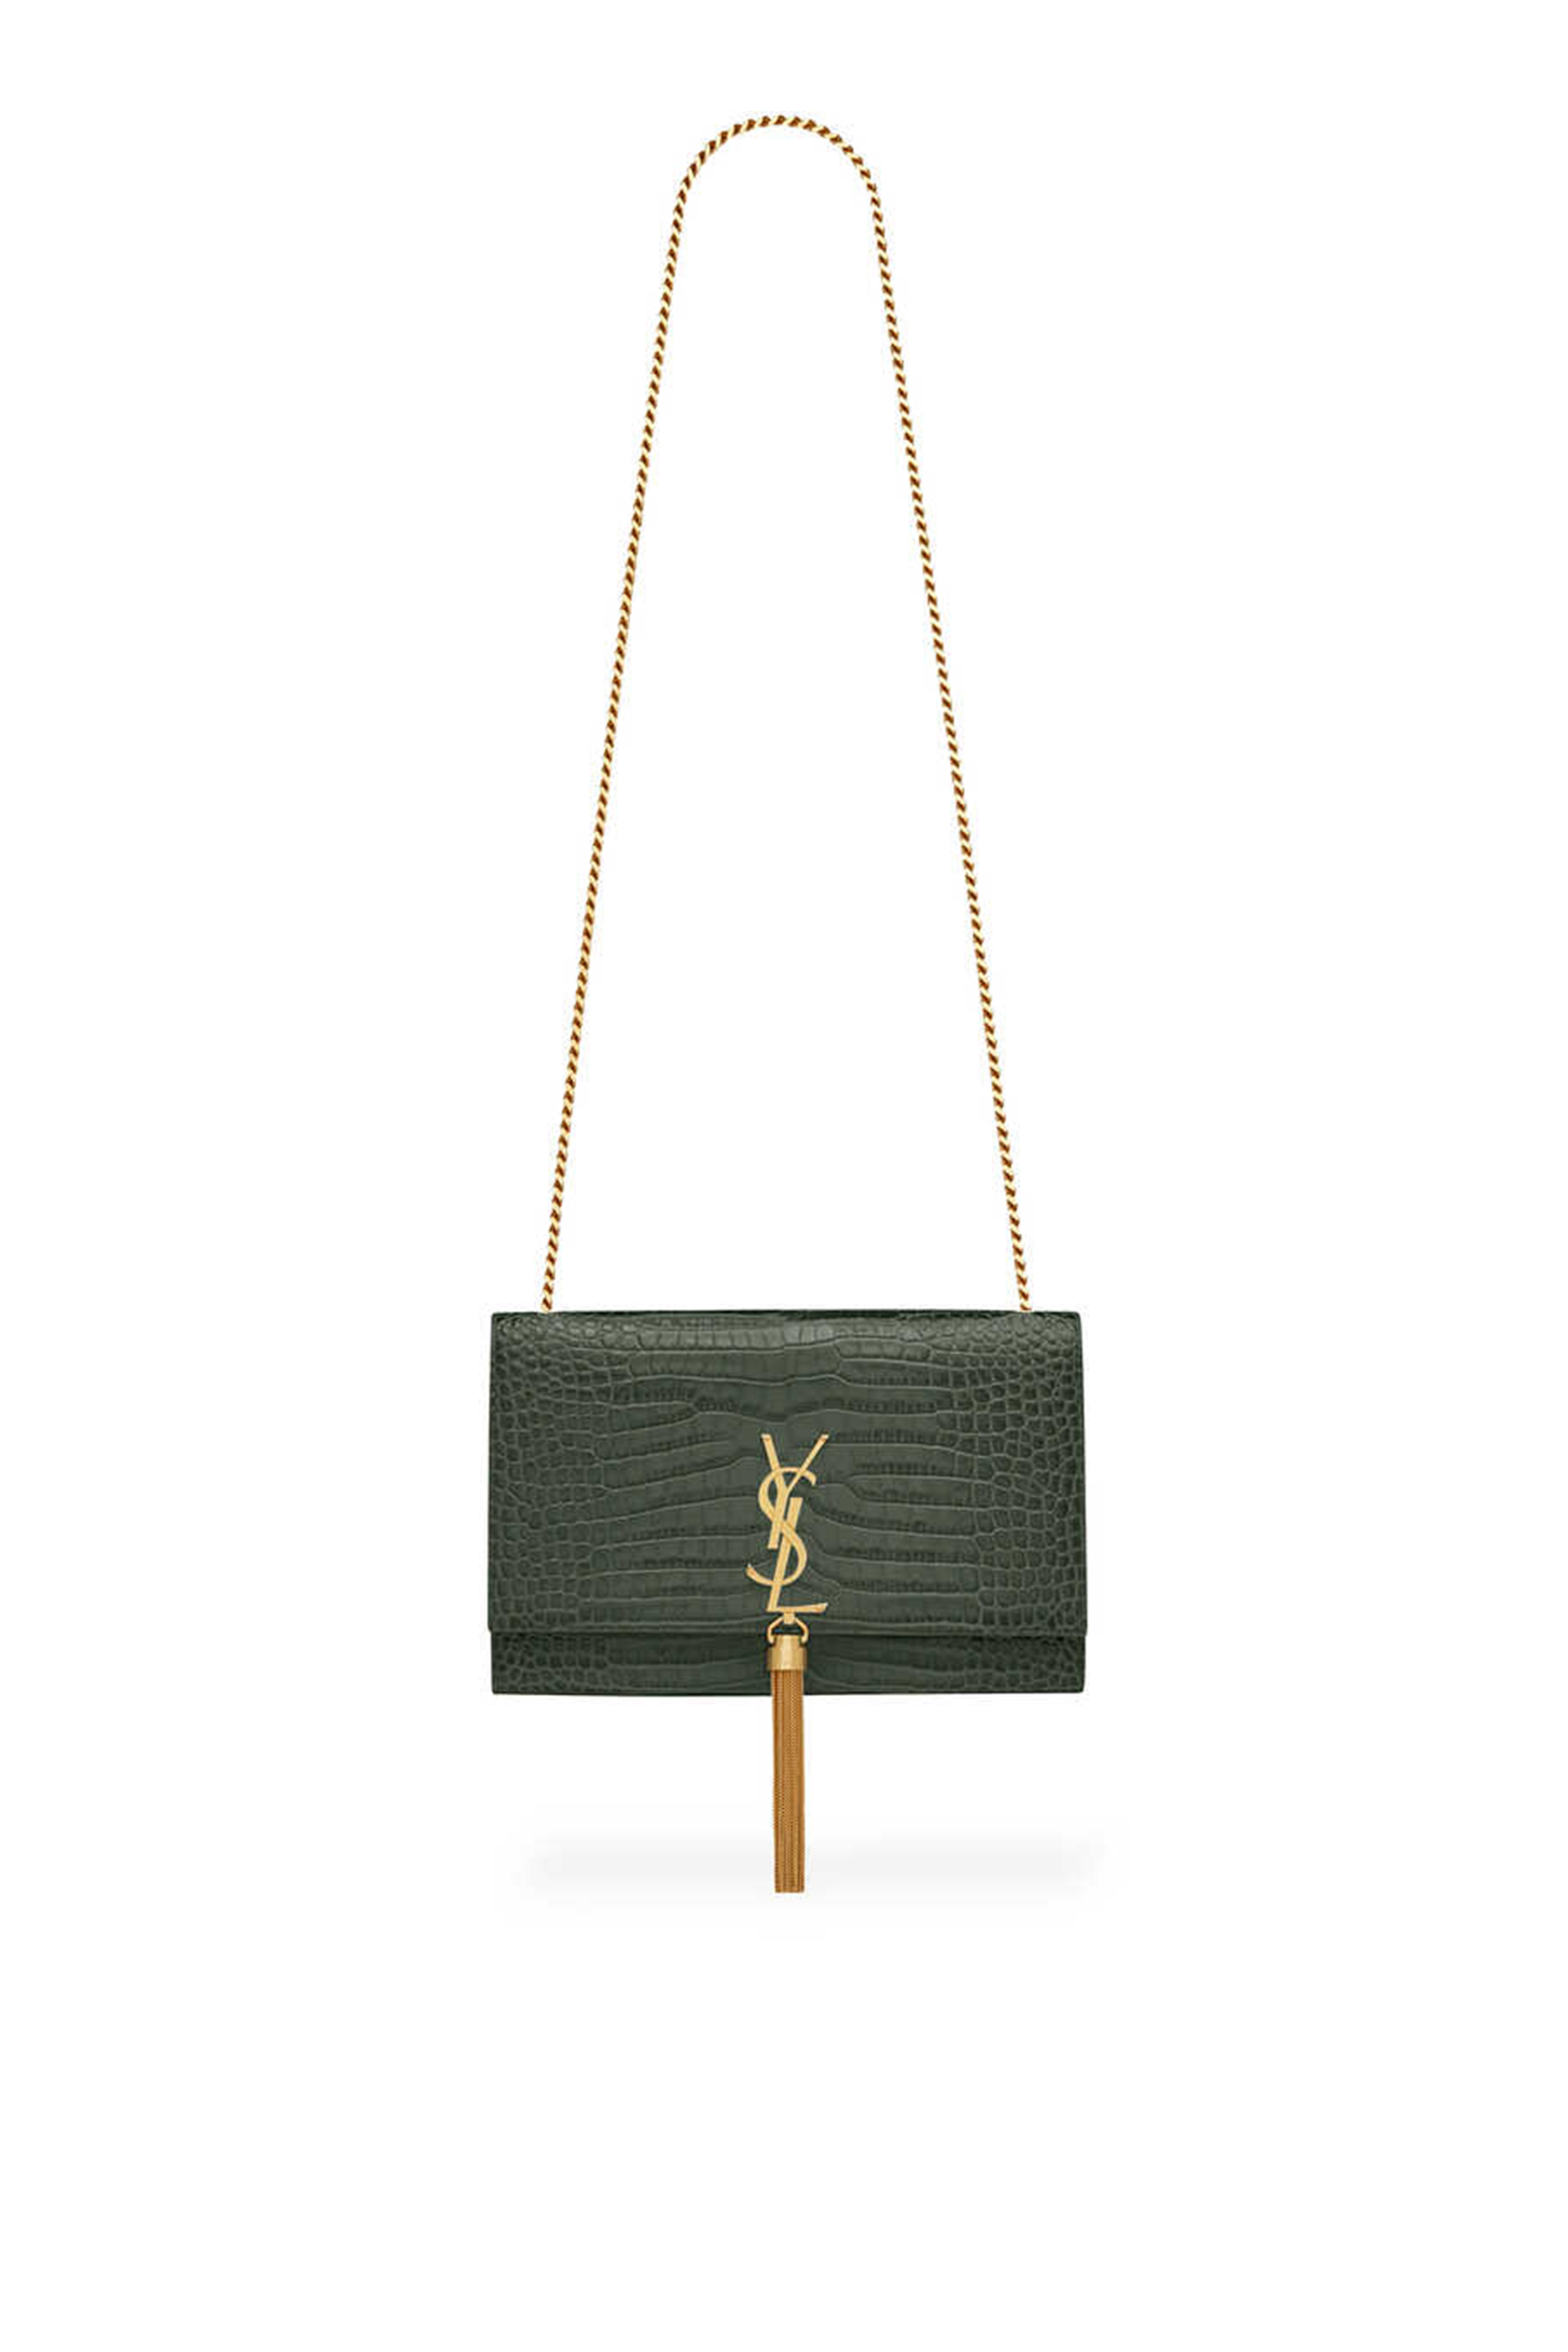 Buy YSL Kate Medium Tassel Chain Bag in Crocodile-Embossed Shiny Leather - Womens for AED 8700 ...